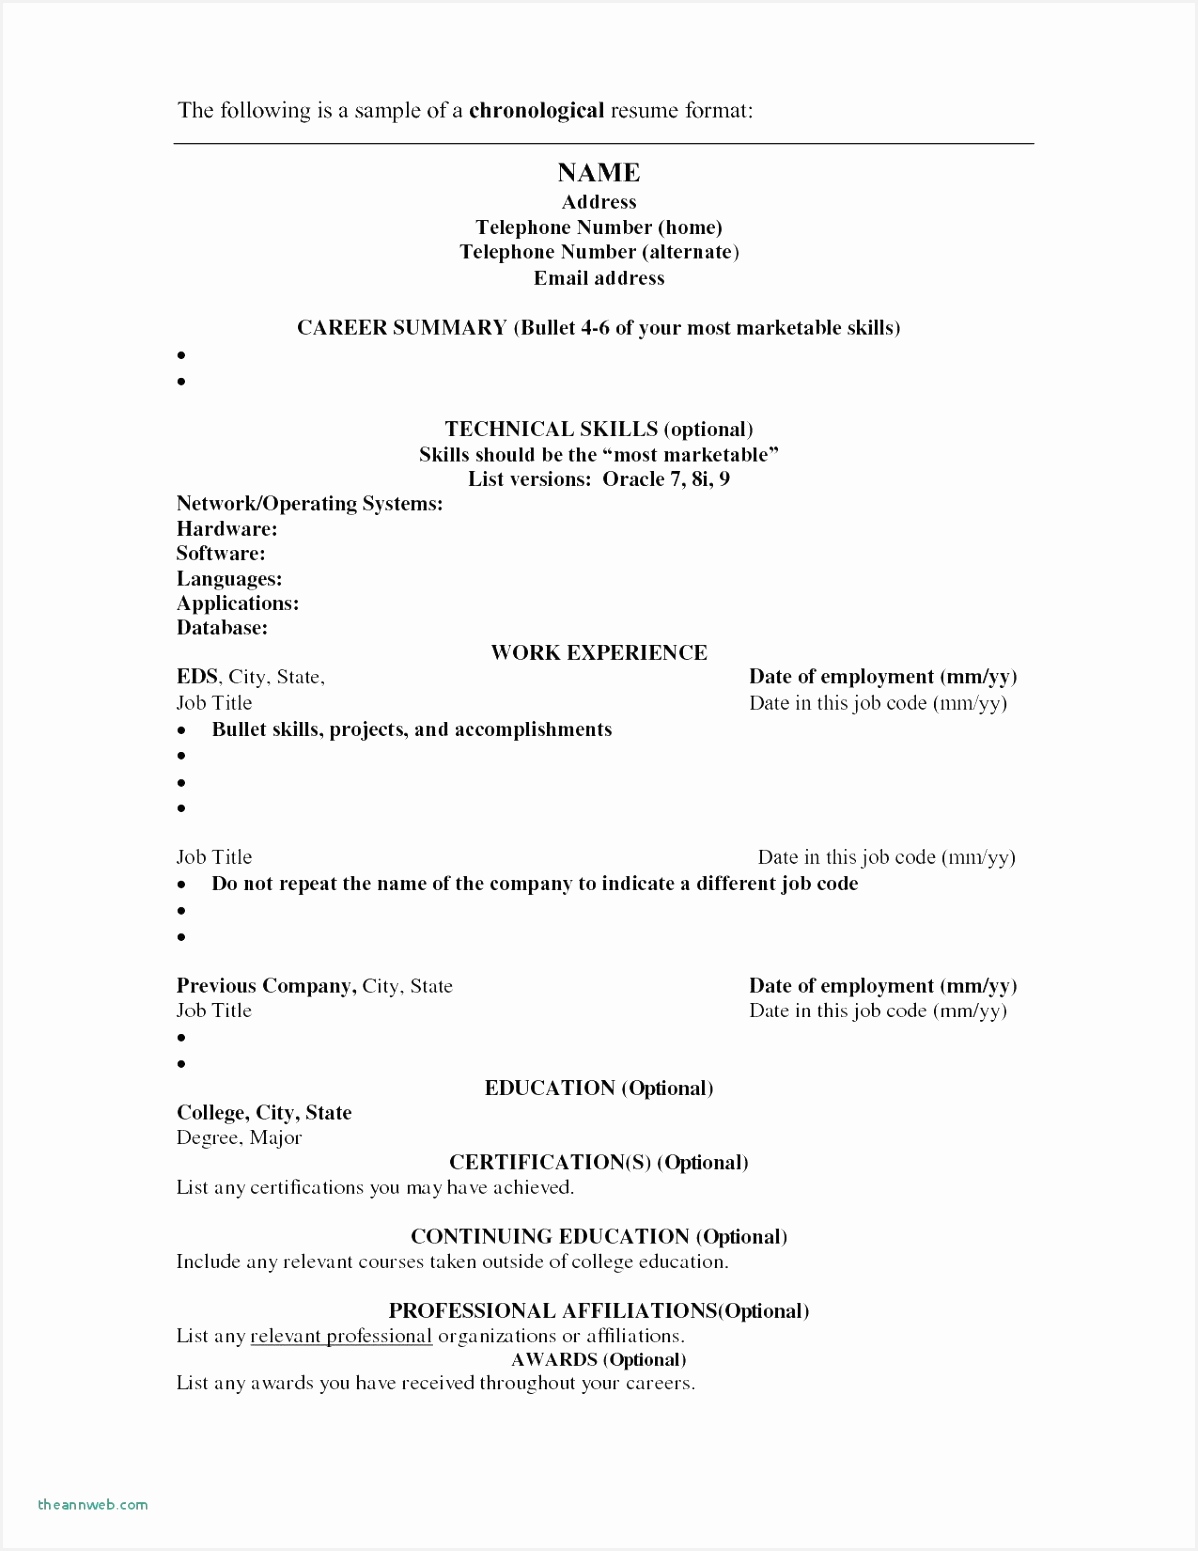 Download Resume for Google with original resolution Here 155111989kkYt